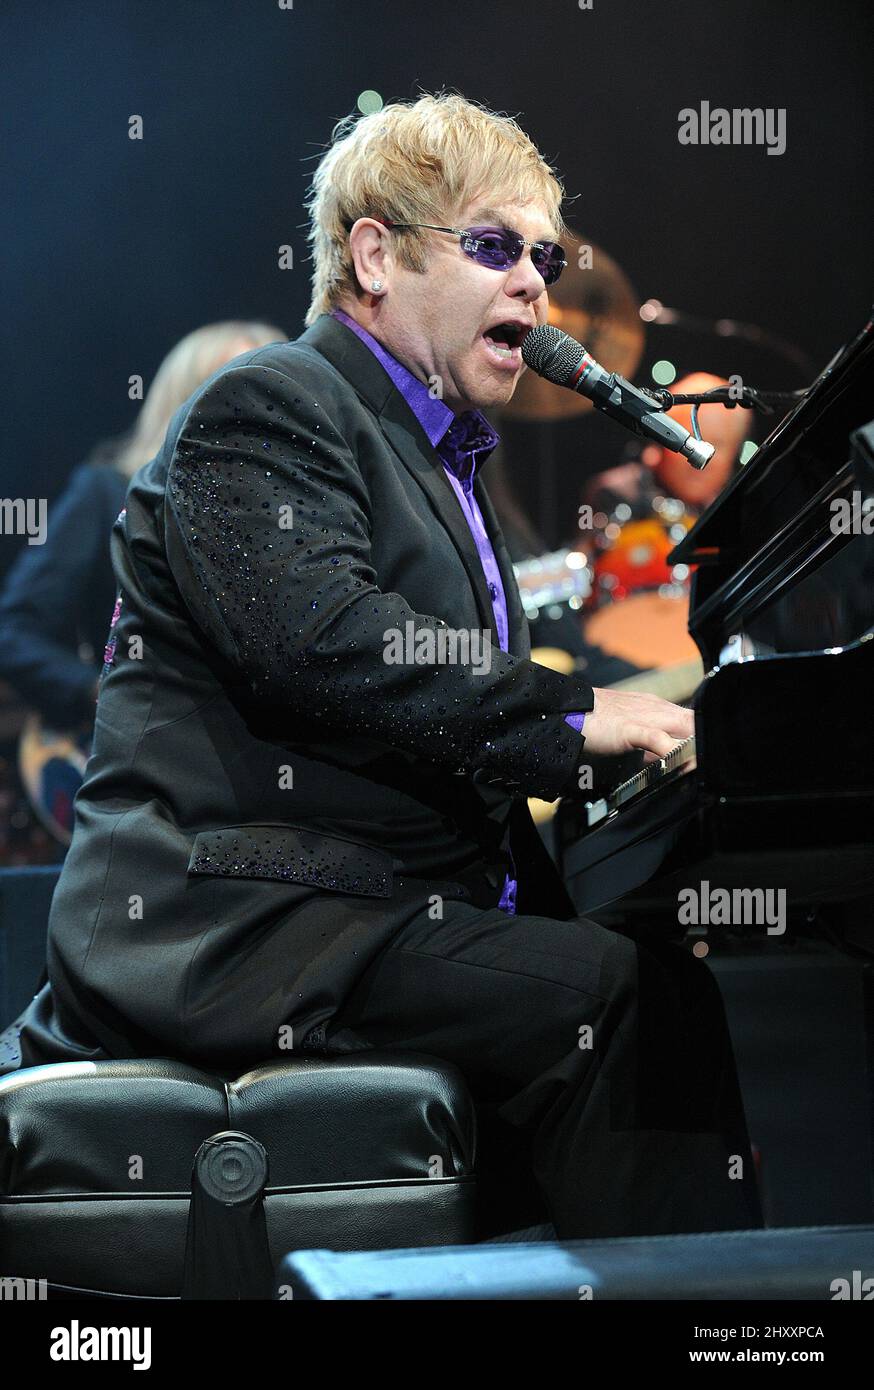 Elton John performs live in concert at the PNC Arena in Raleigh in North Carolina, USA. Stock Photo